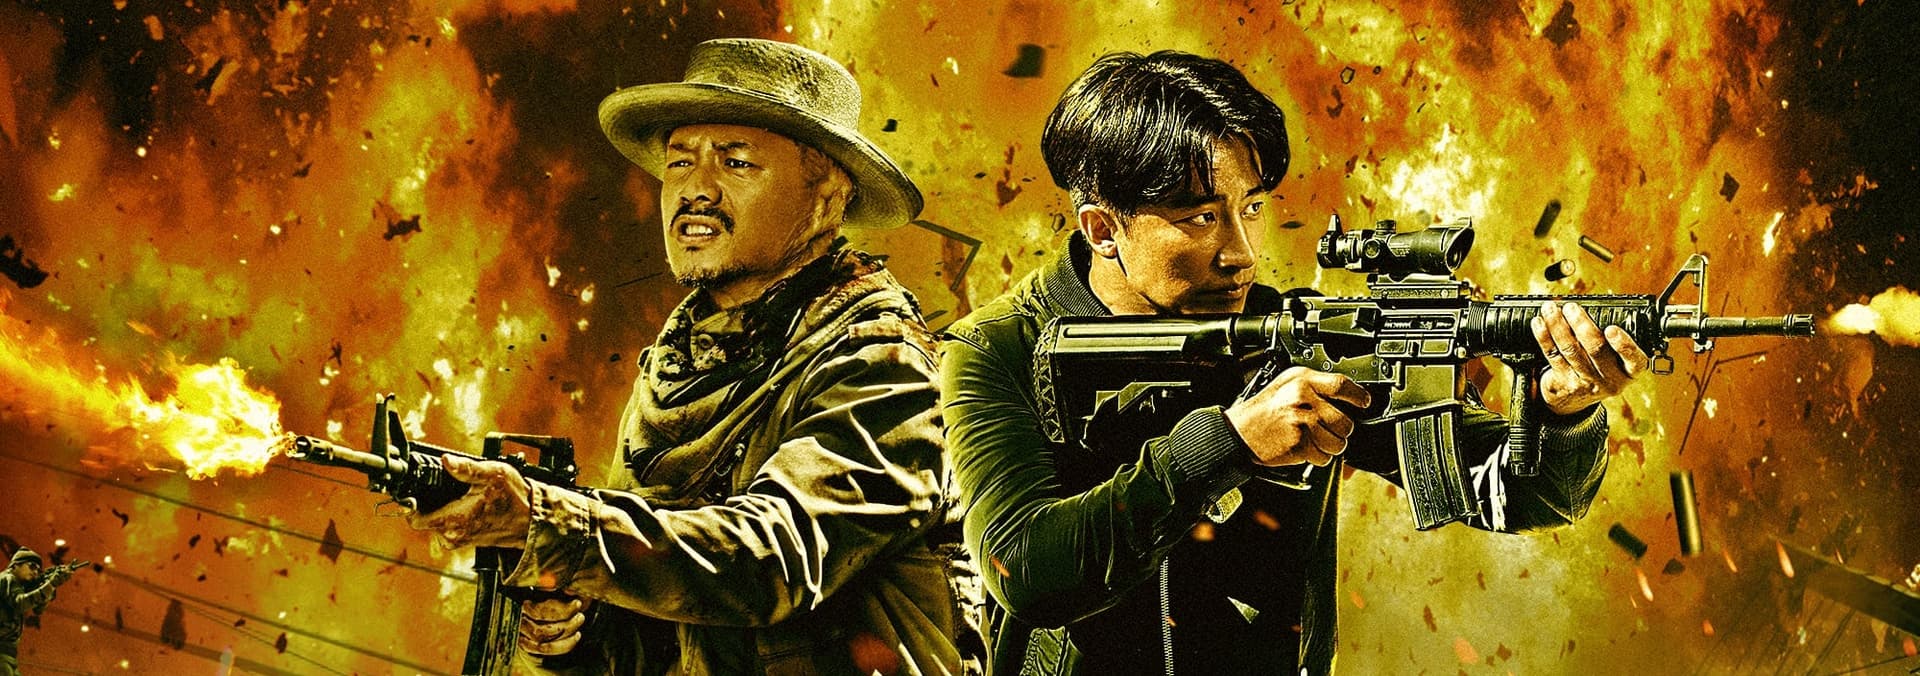 free download subtitle indonesia operation mekong